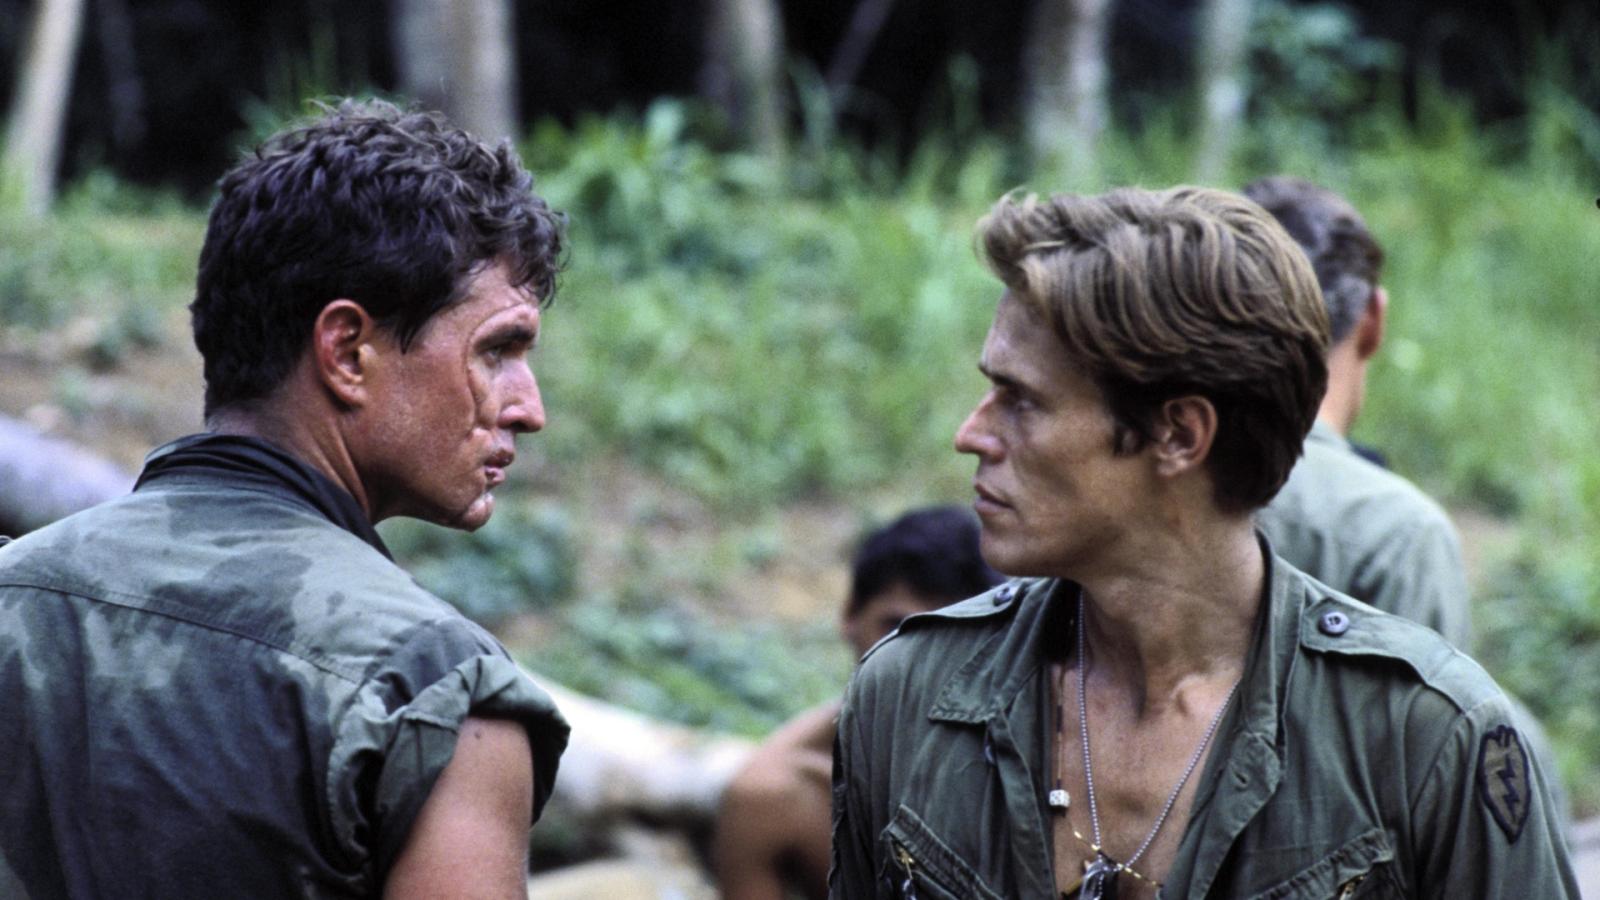 10 War Films That'll Make Your Sibling Rivalries Seem Petty - image 6